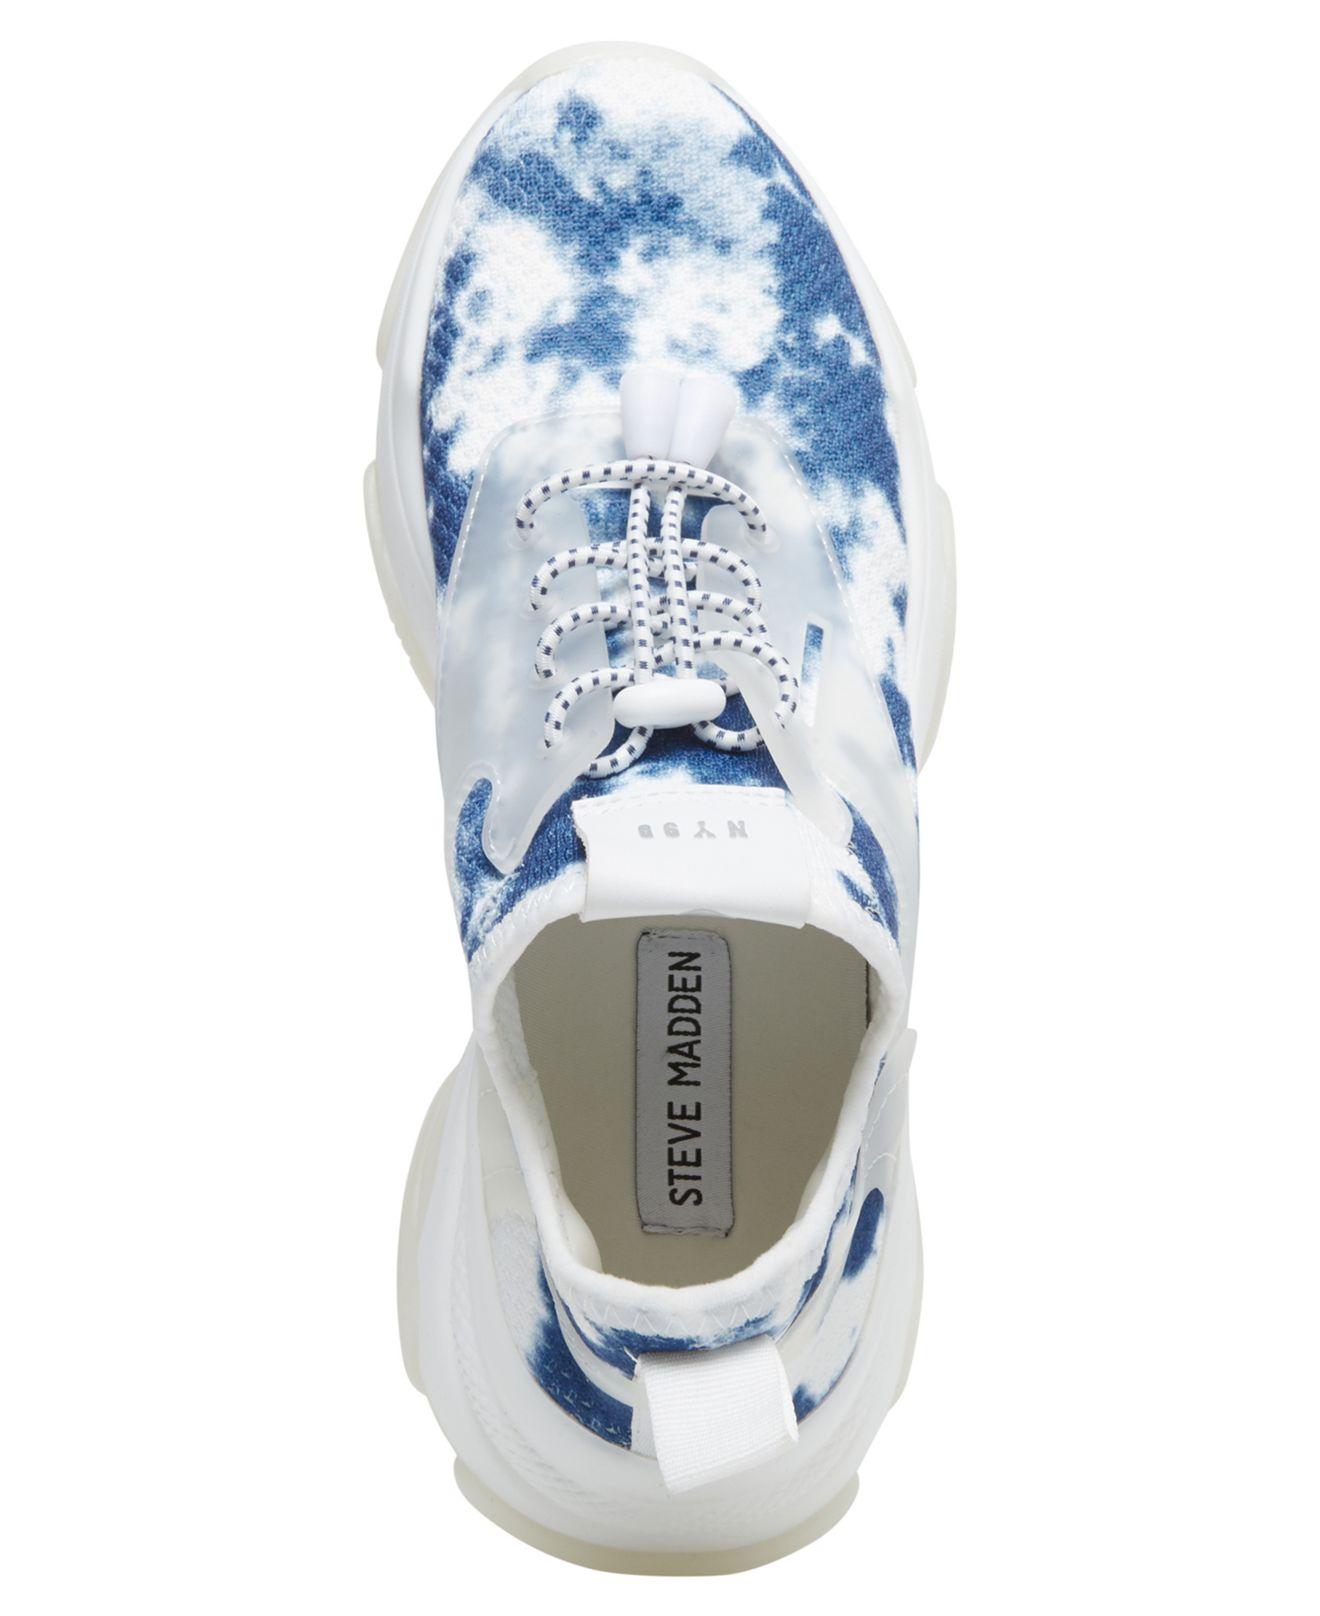 Womens Possession Grey / Blue Lace-Up Low-Profile Shoes